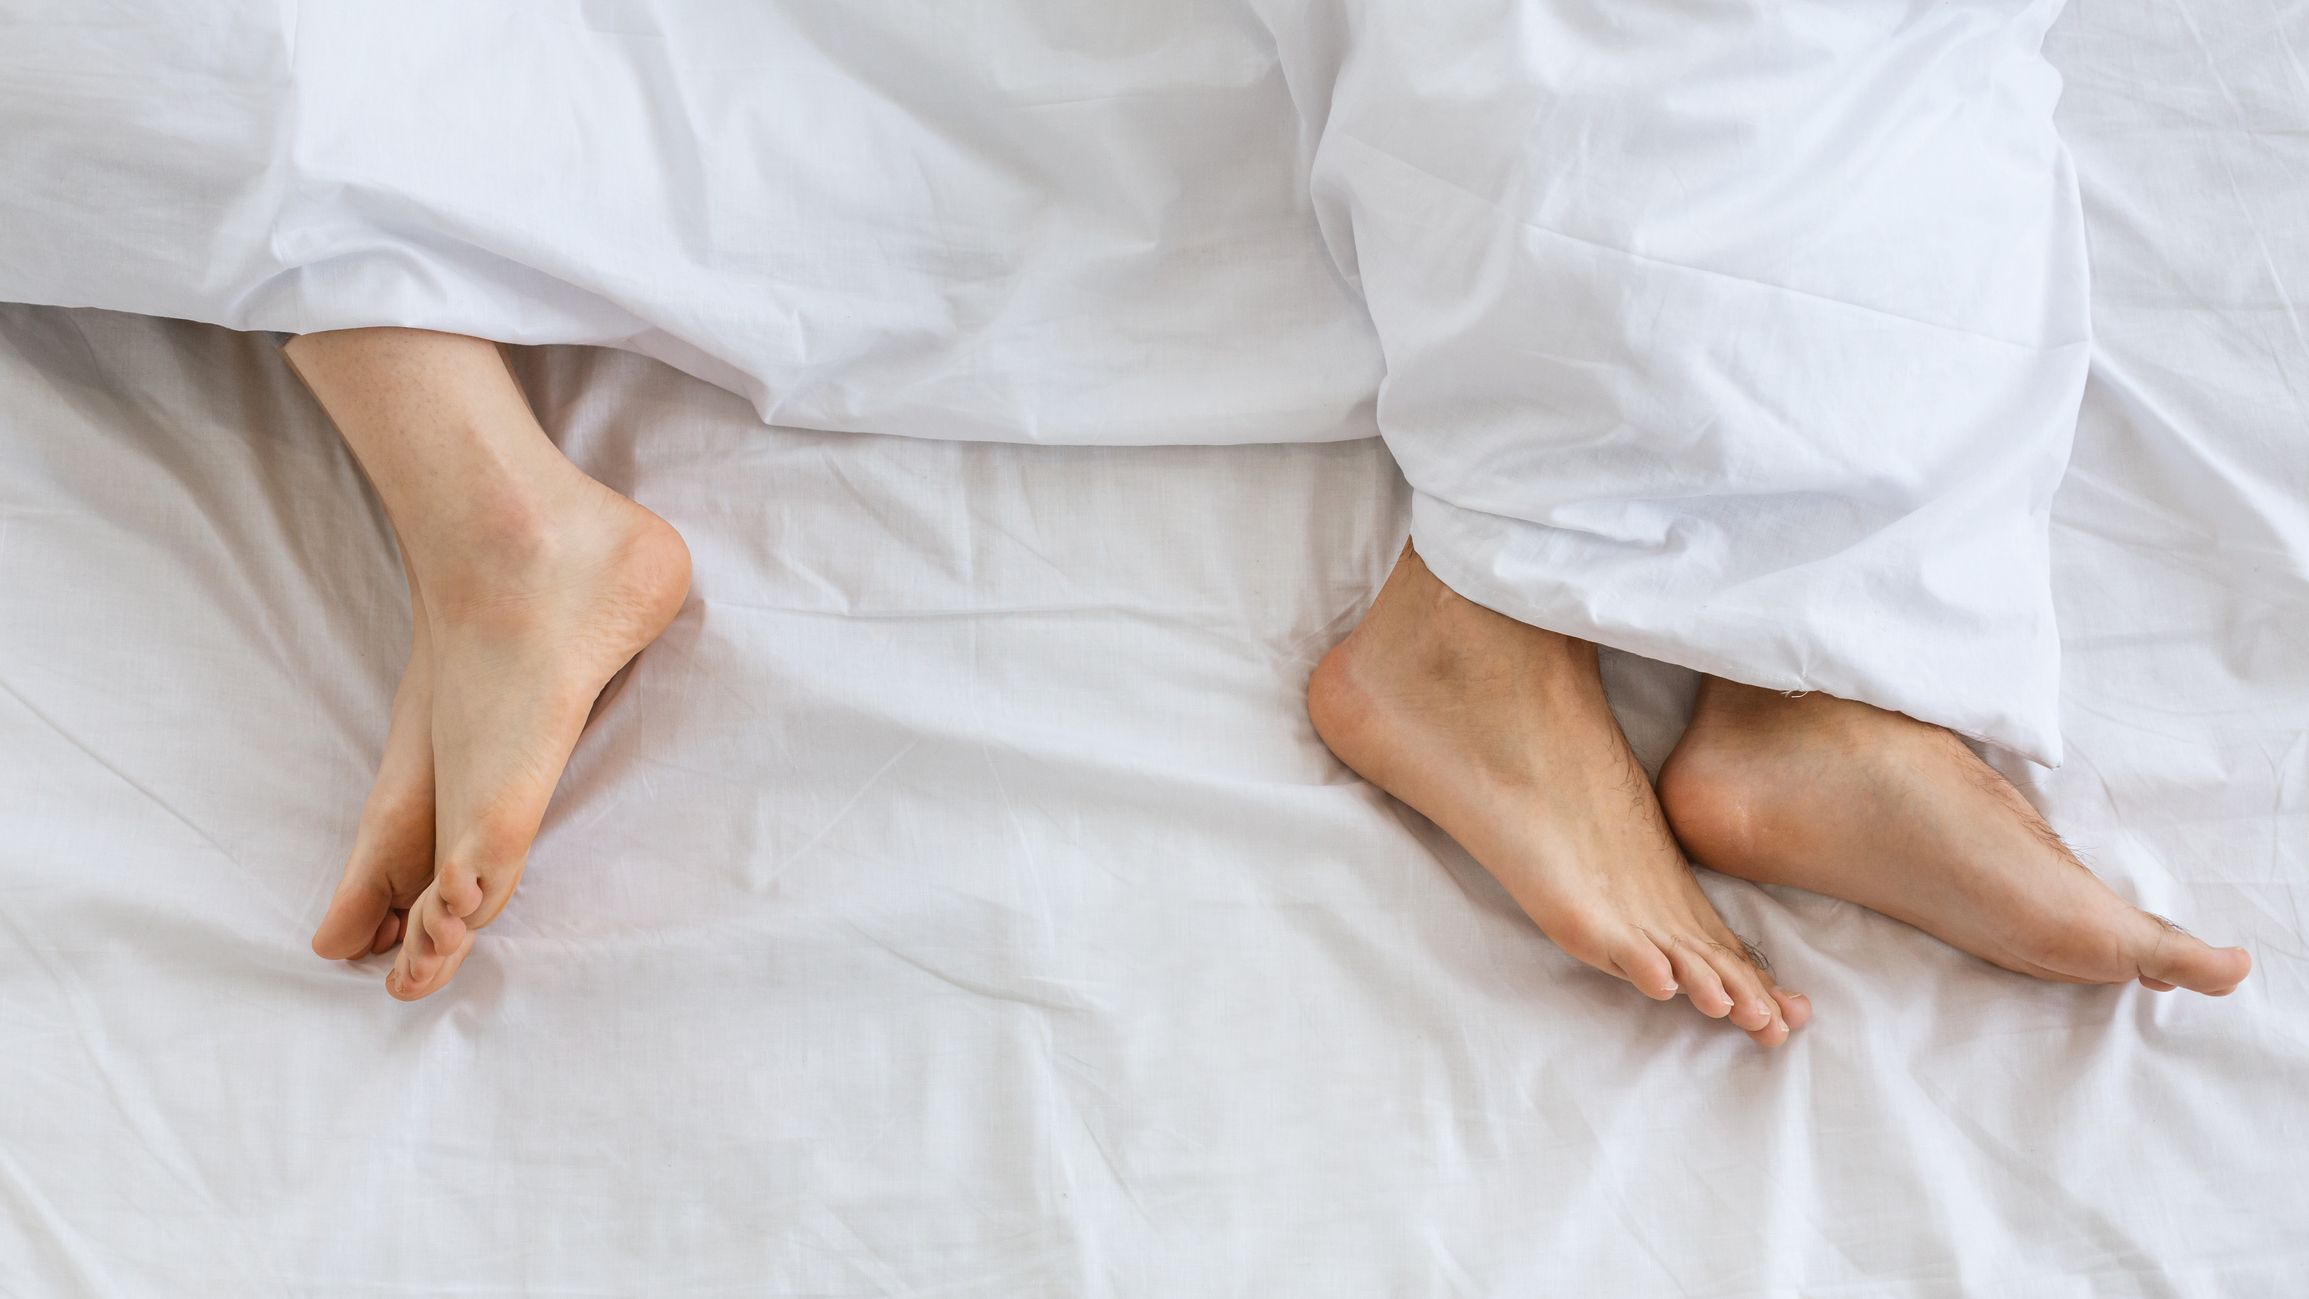 16 Reasons Why You Don't Want To Have Sex Anymore, Per Experts